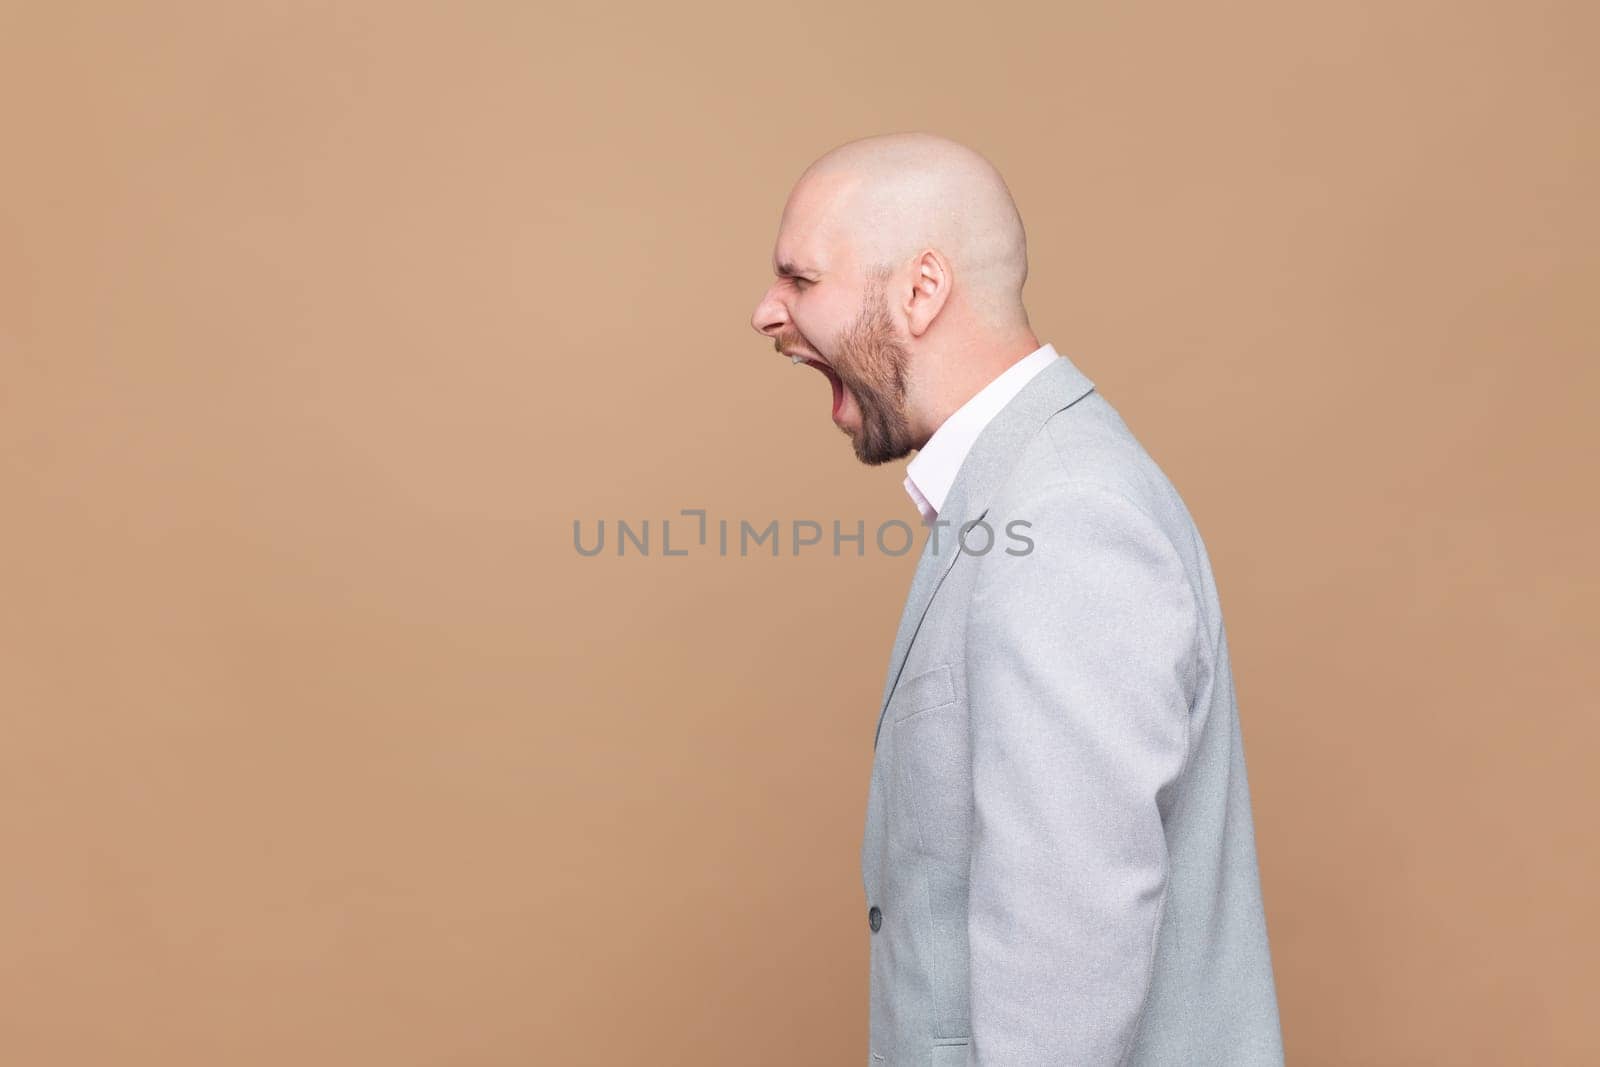 Side view portrait of angry or shocked bald bearded man standing, looking forward and screaming, copy space foe advertisement, wearing gray jacket. Indoor studio shot isolated on brown background.